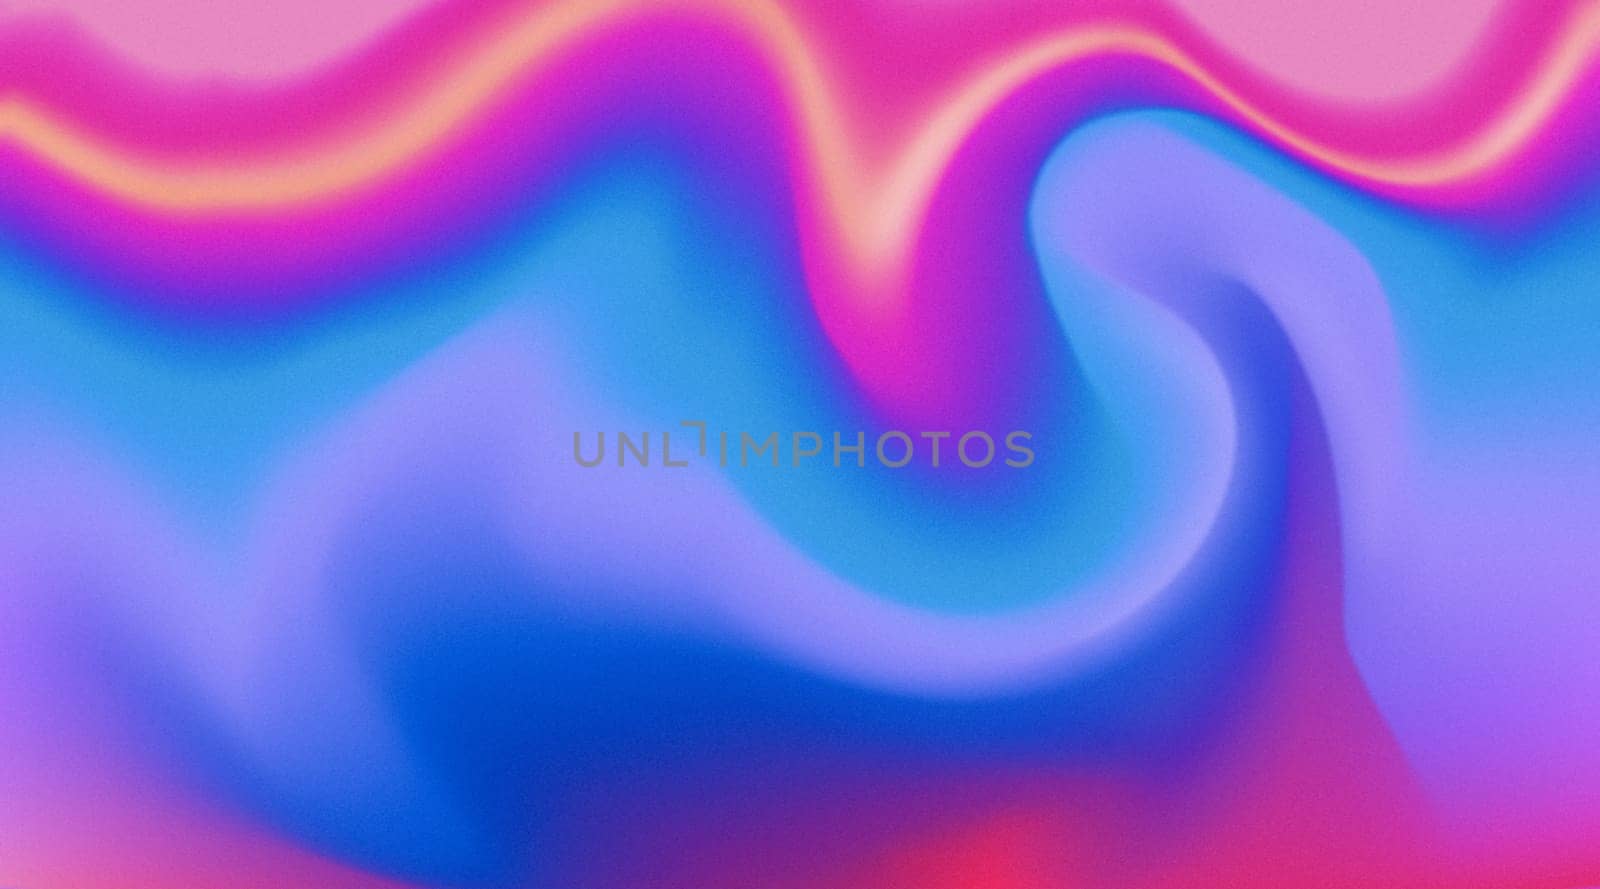 Abstract grainy background glowing pink blue purple red blurred color flow banner poster cover design. by ImagesRouges